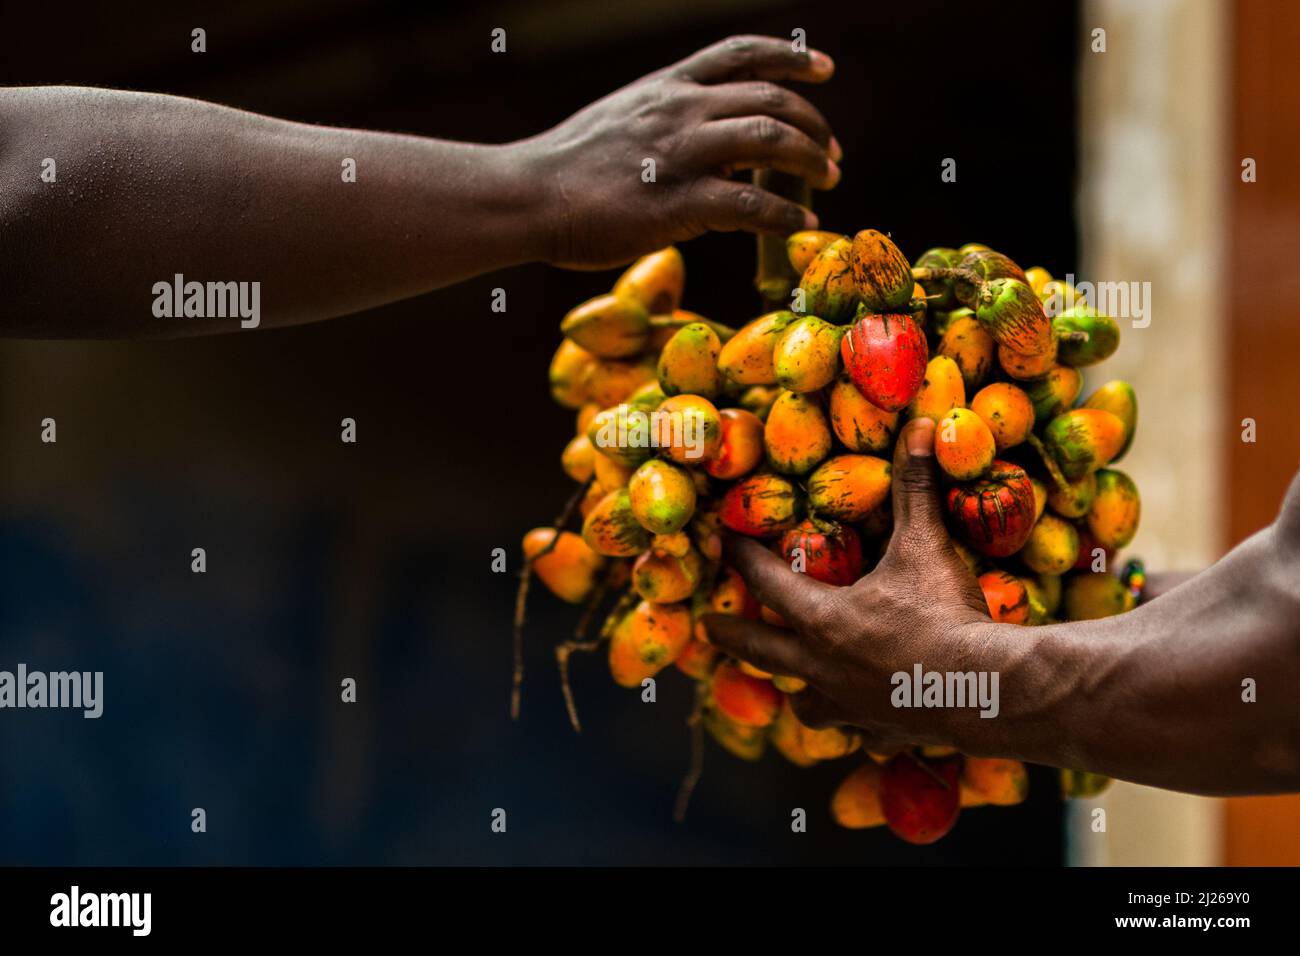 Hands of Afro-Colombian workers are seen holding a bunch of chontaduro (peach palm) fruits in a processing facility in Cali, Valle del Cauca, Colombia. Stock Photo